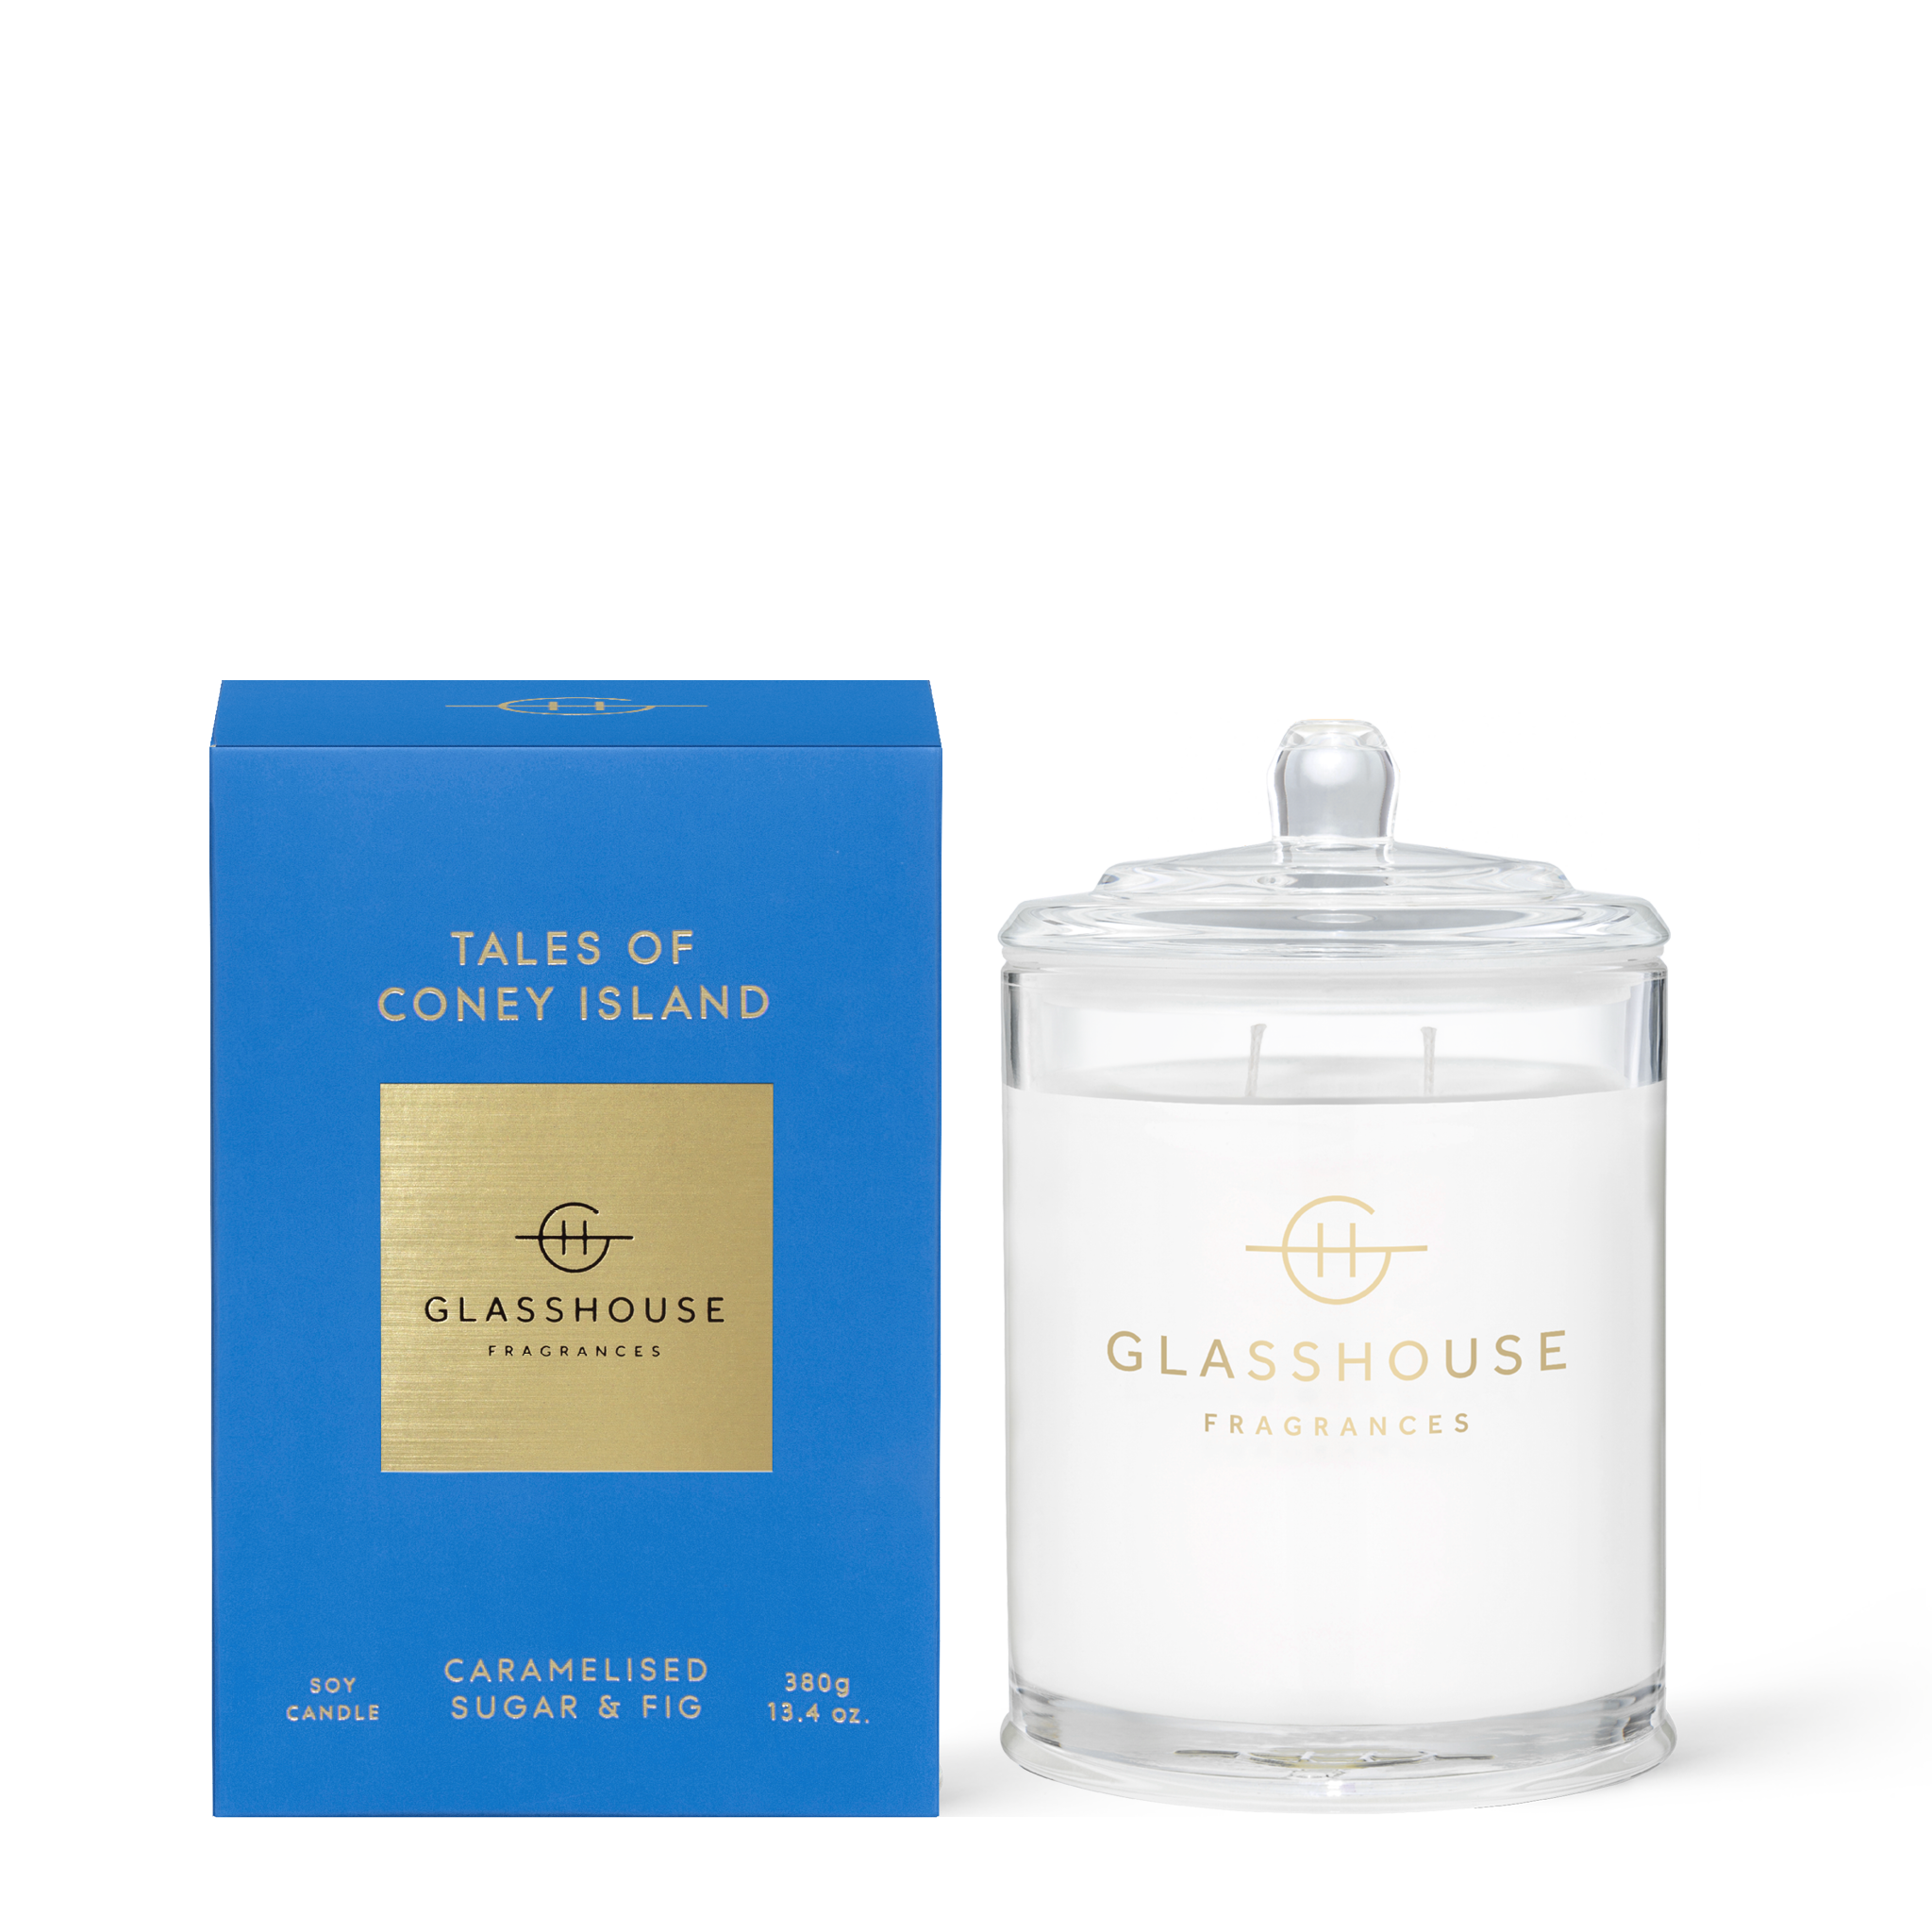 Glasshouse Fragrances Tales of Coney Island Caramelised Sugar and Fig 380g Soy Candle with box